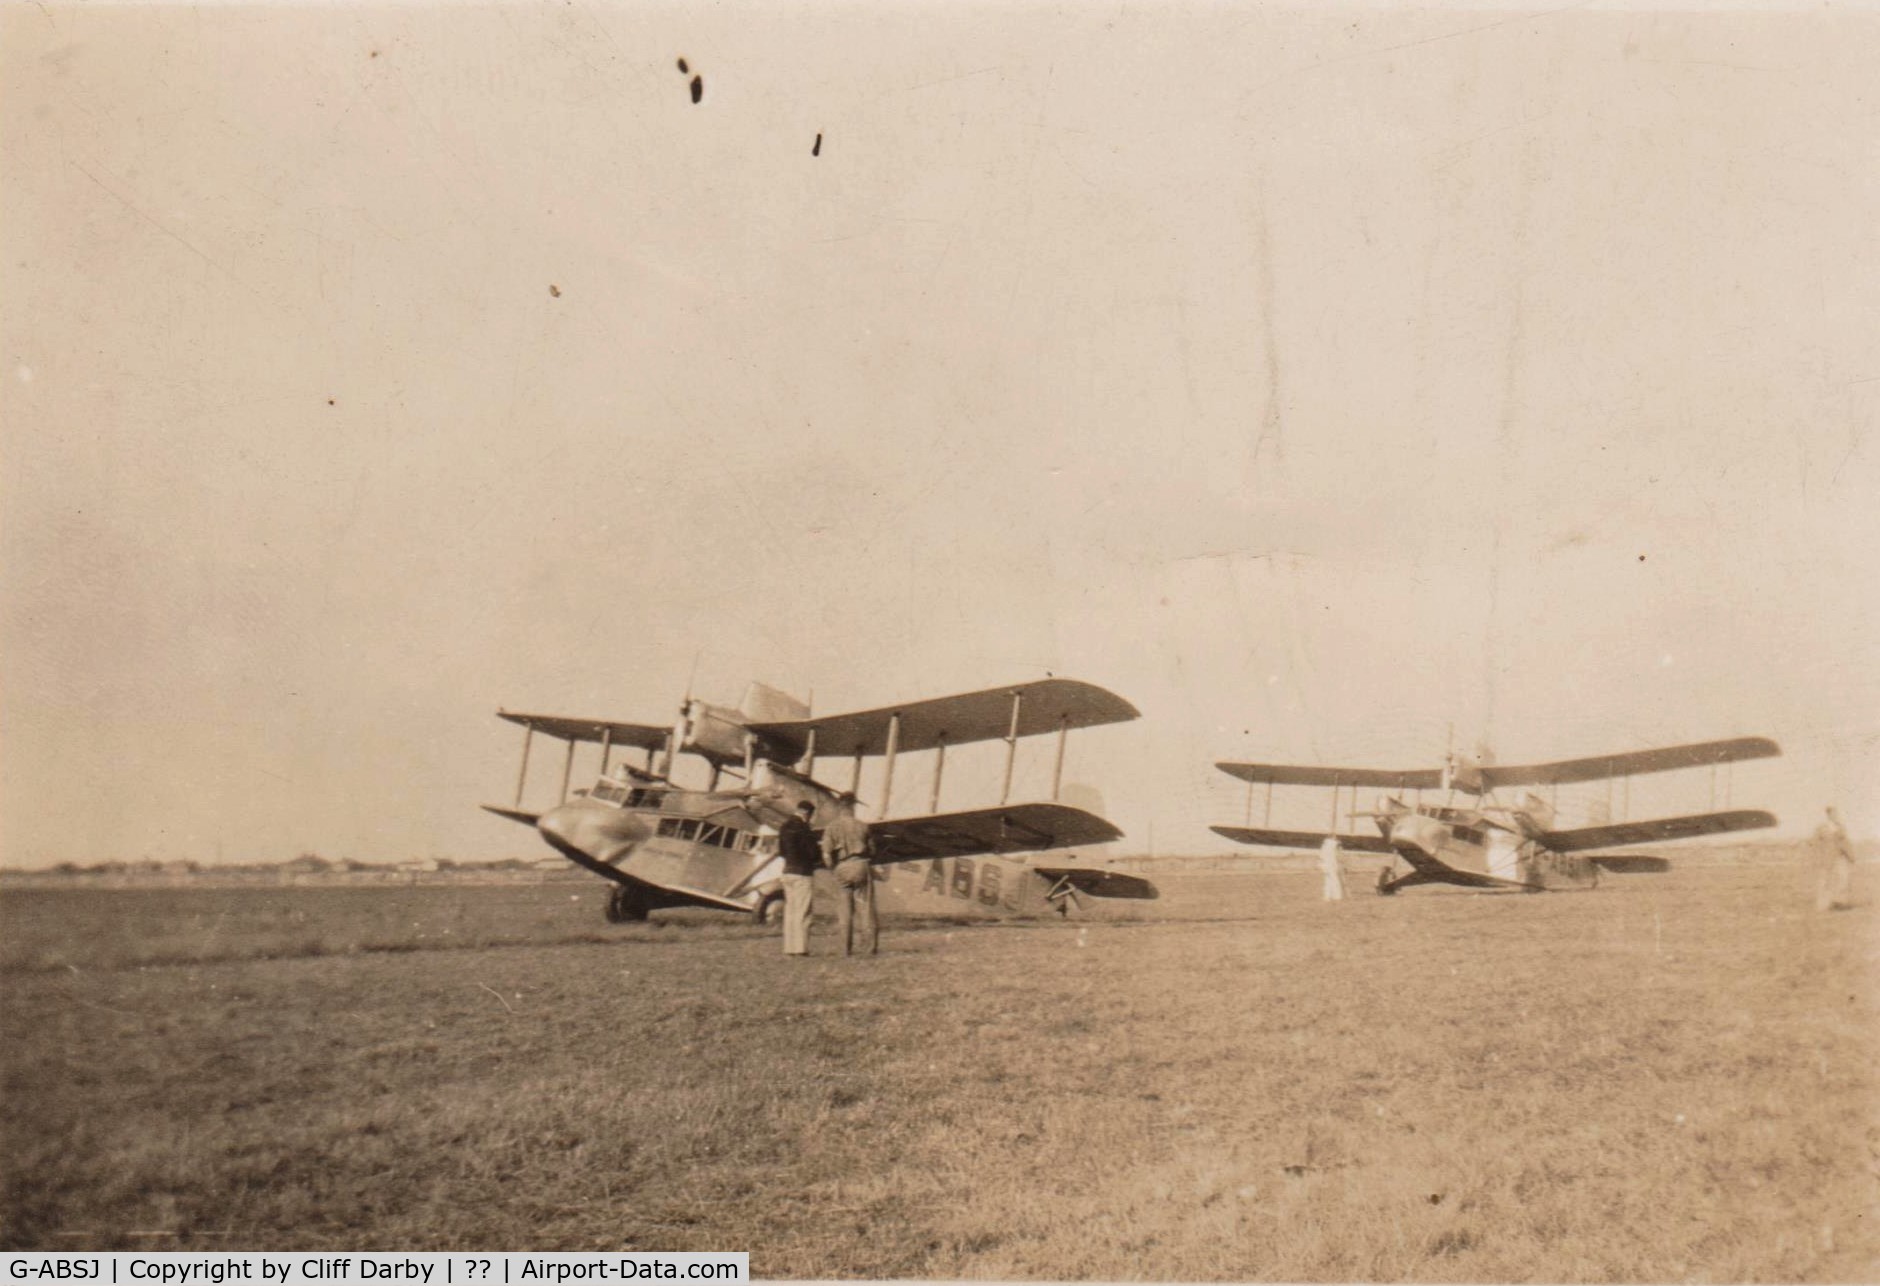 G-ABSJ, 1932 Airspeed AS.4 Ferry C/N 5, Found in my box of old photographs